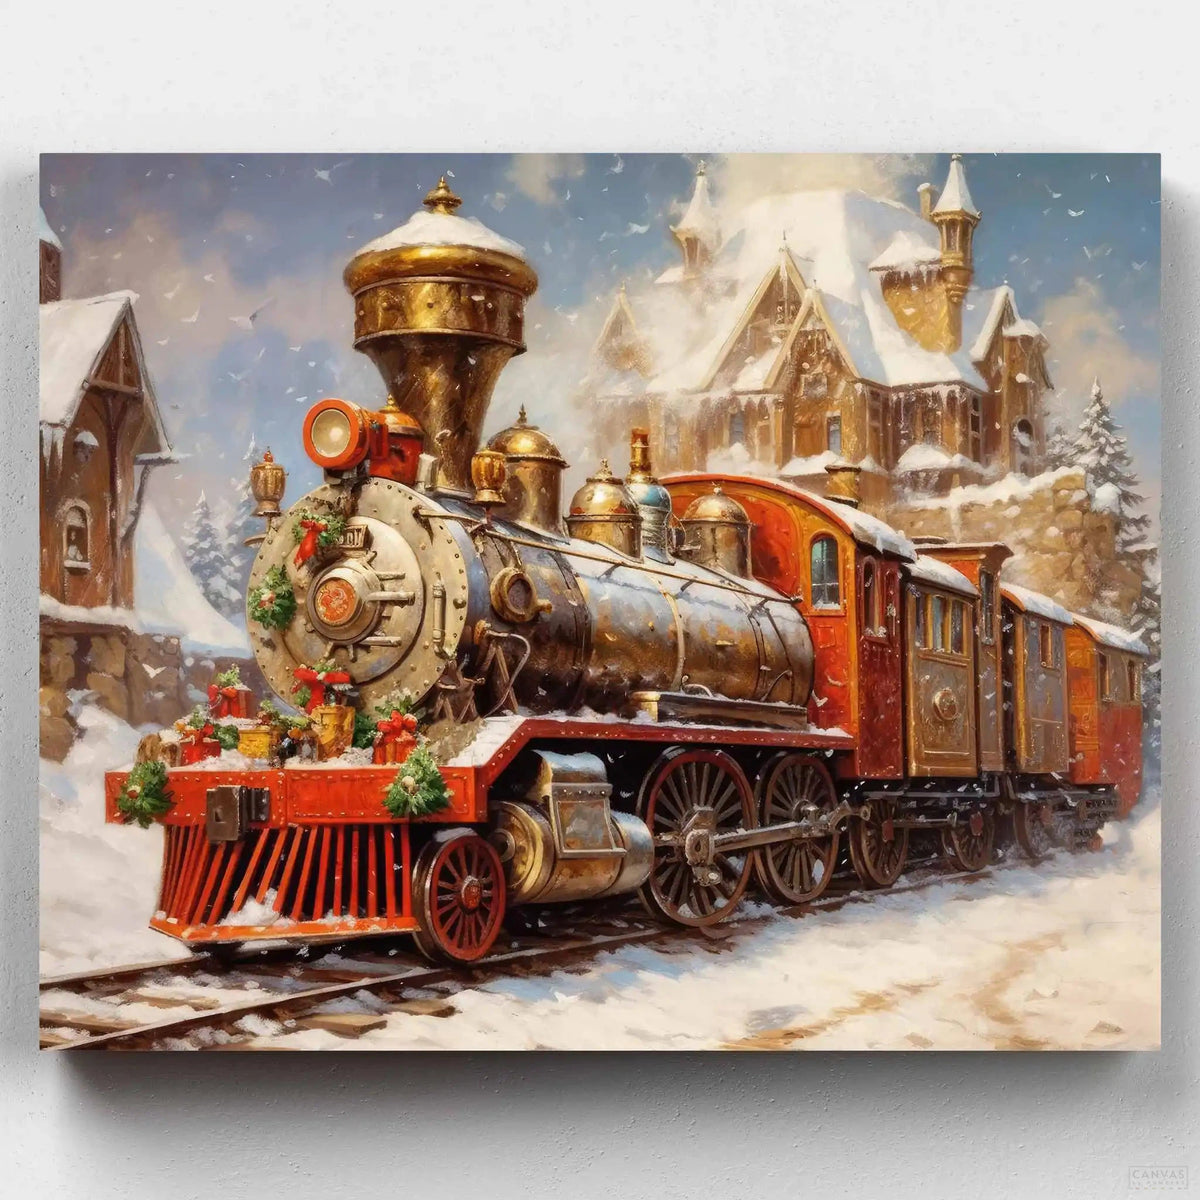 Joy Express - Paint by Numbers-Unleash holiday cheer with 'Joy Express'—a festive train journey in a snowy wonderland, perfect for a paint-by-numbers Christmas delight.-Canvas by Numbers